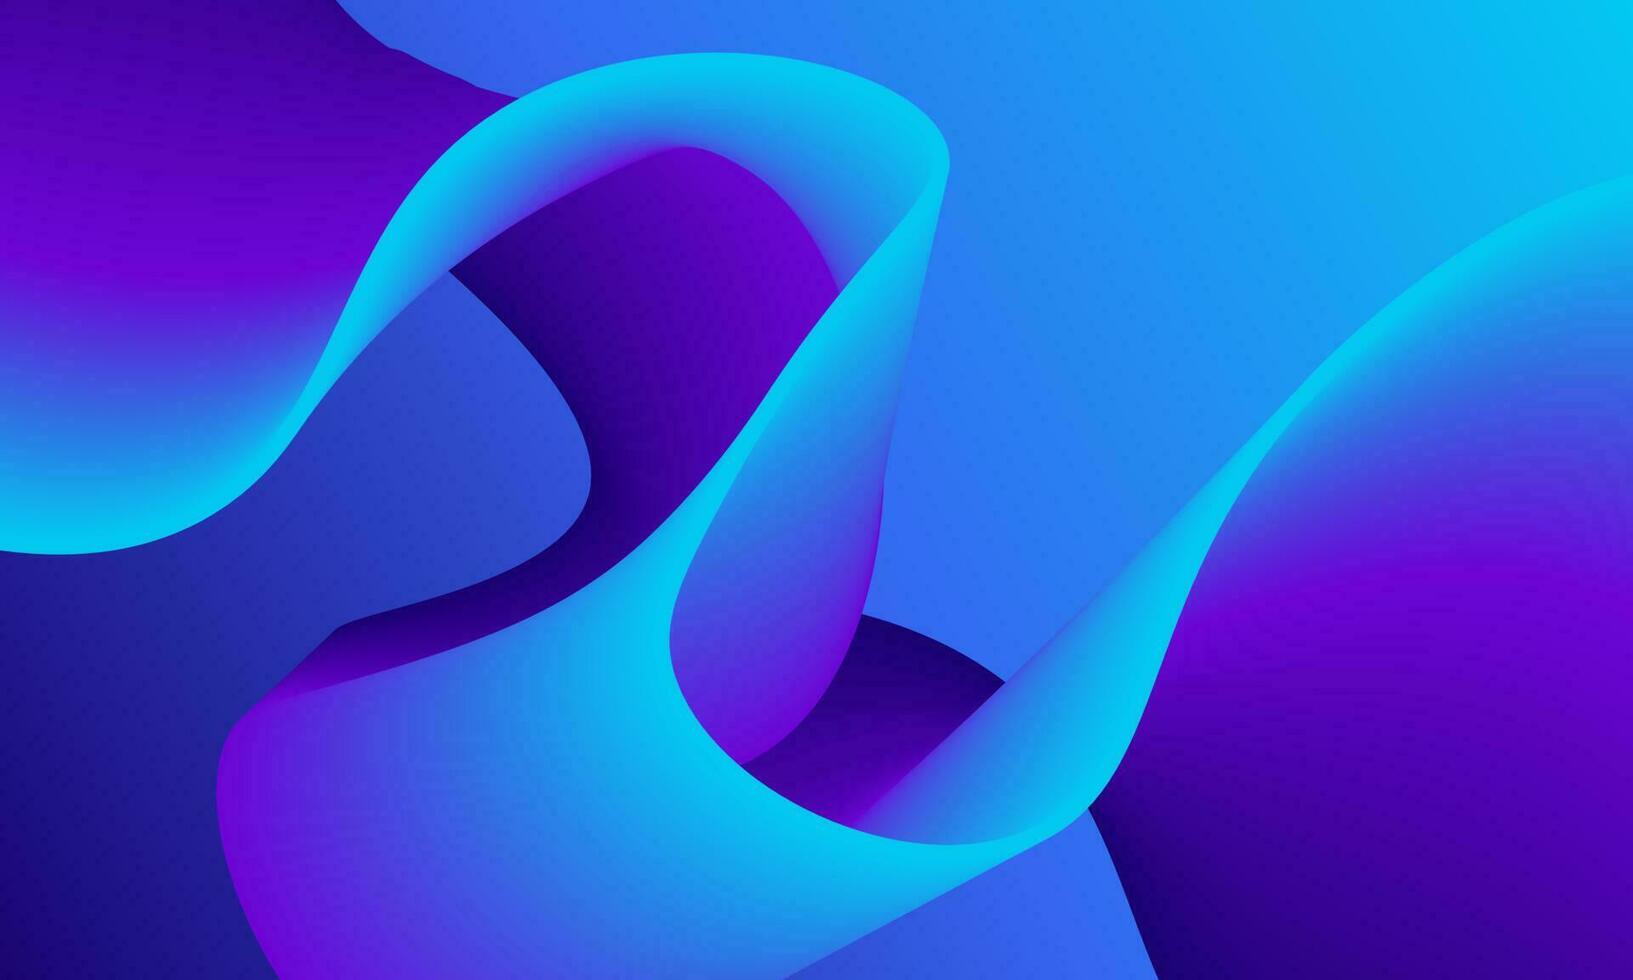 Modern abstract background with fluid style vector